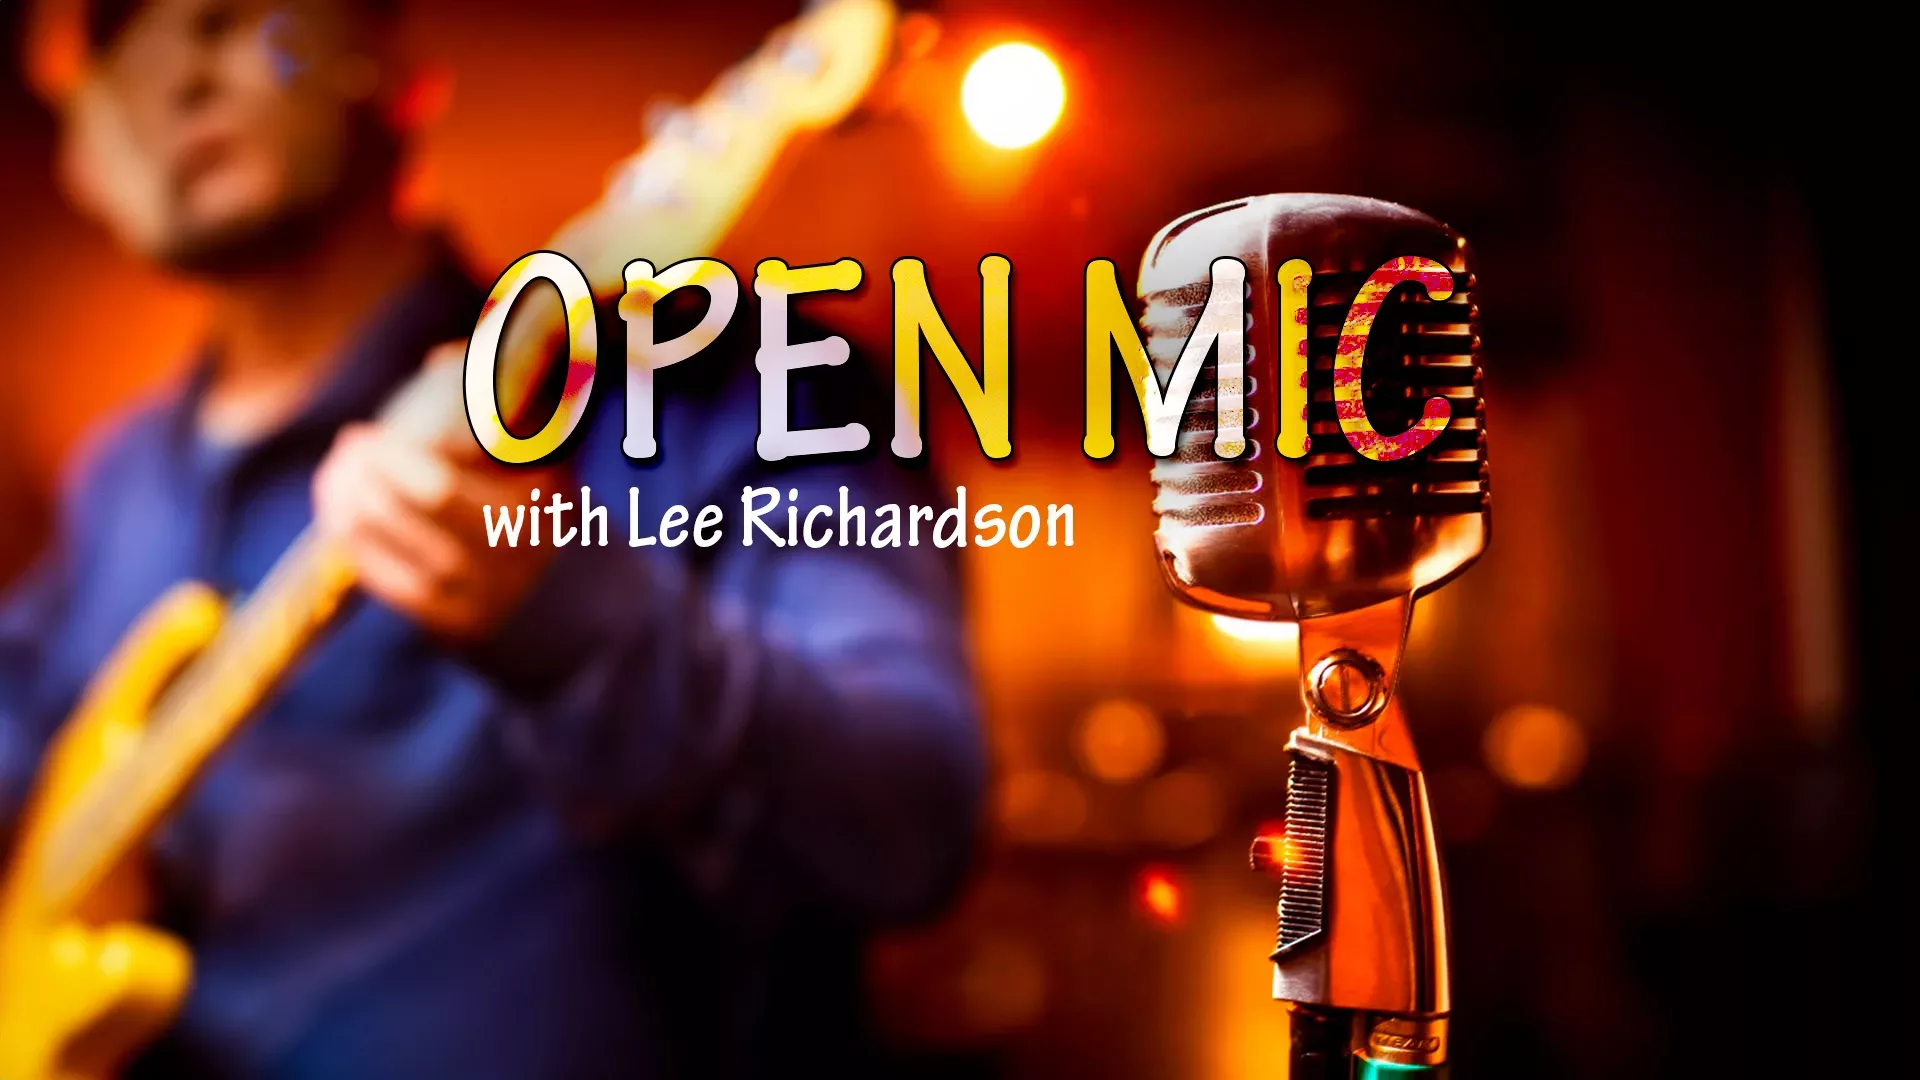 Open Mic with Lee Richardson at The Hideout. Malvern Rocks Gig Guide for Music in Malvern. Gigs, concerts, live music, open mic nights. Make Malvern your destination for music.